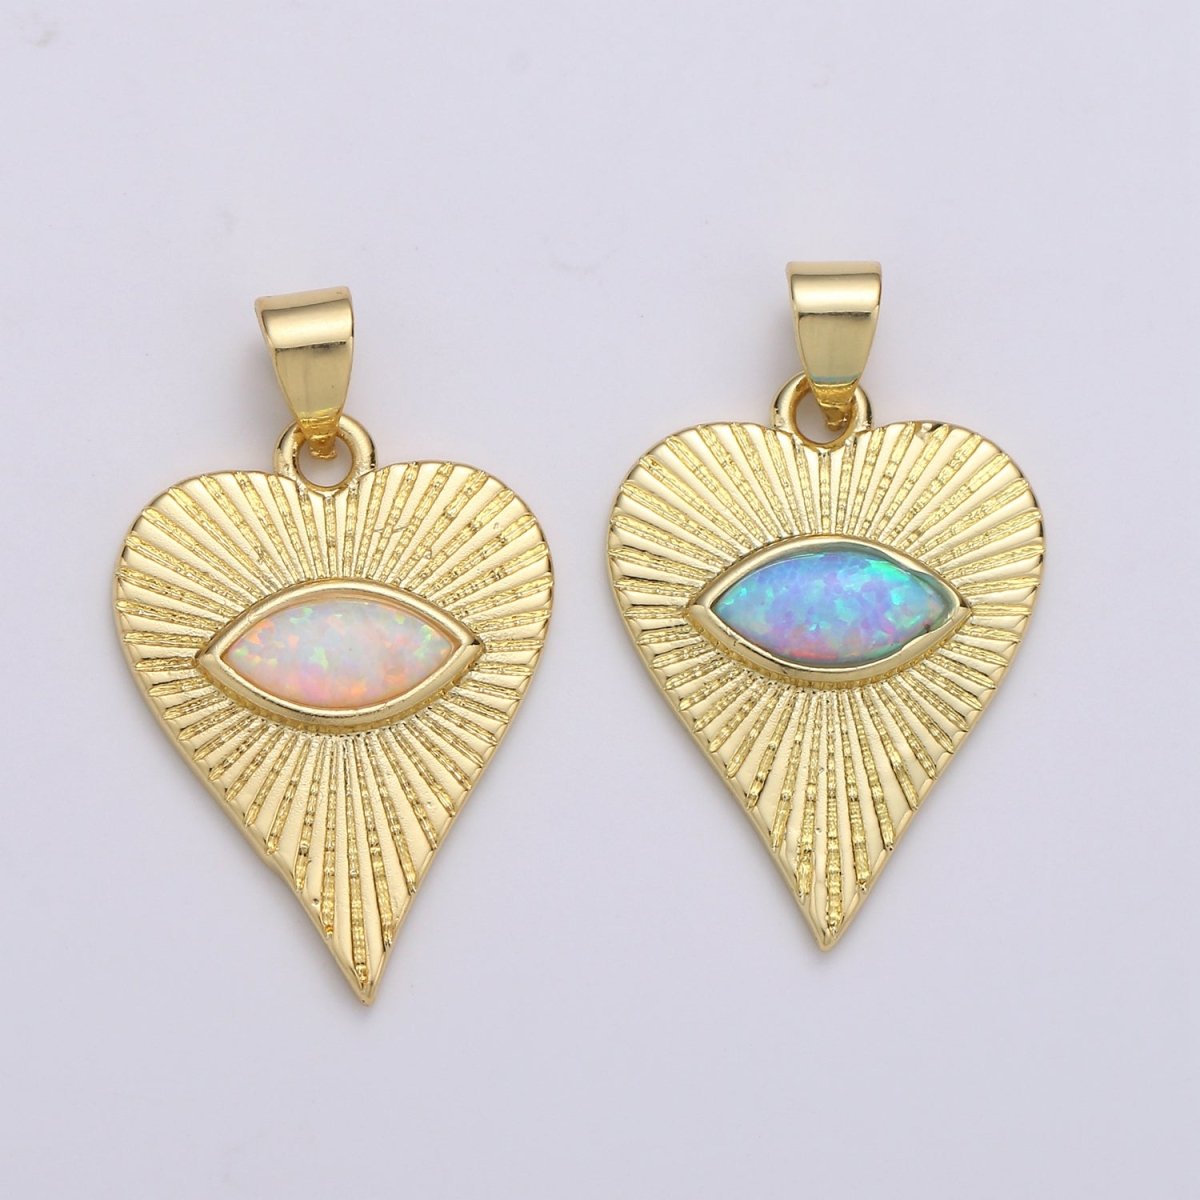 26x16mm Wholesale 14K Yellow Gold Filled Eye of Ra in Heart Pendant, Sparkling Synthetic Opal Pendant Pendant for Necklace Bracelet Anklet Making J-219 - DLUXCA